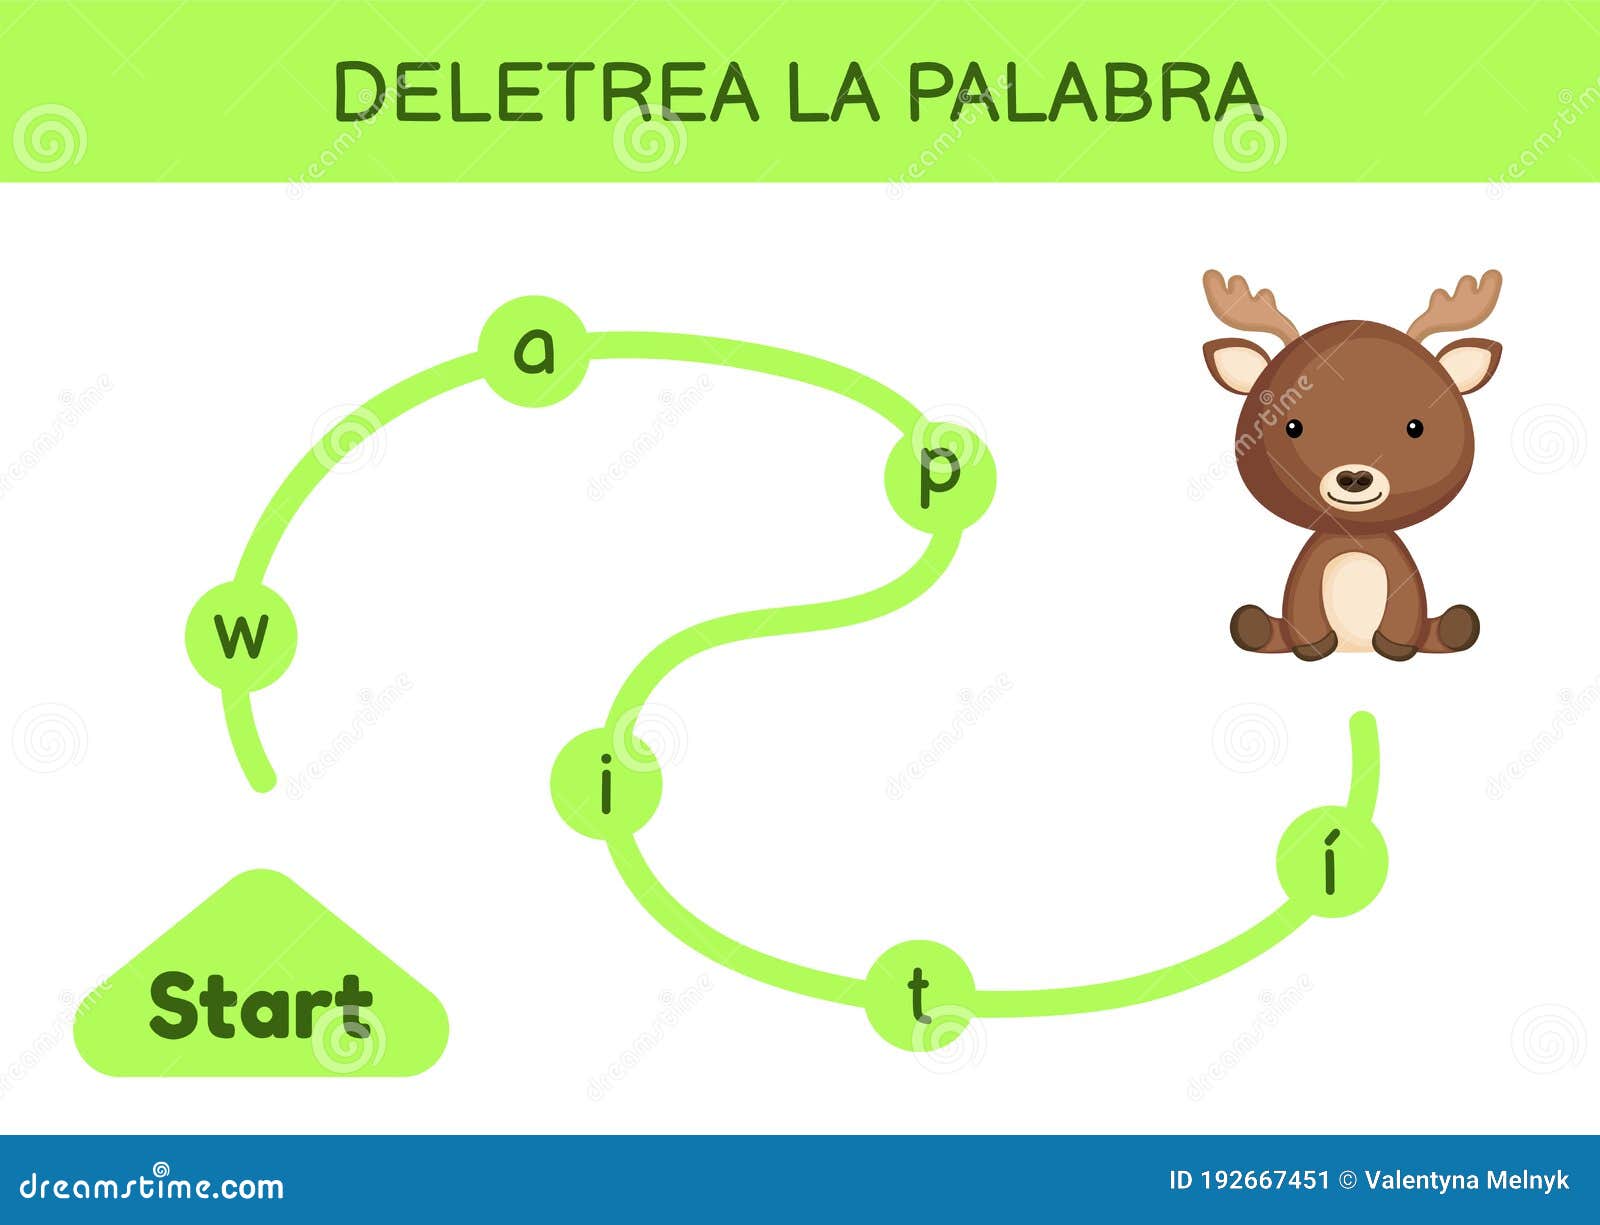 deletrea la palabra - spell the word. maze for kids. spelling word game template. learn to read word moose. activity page for